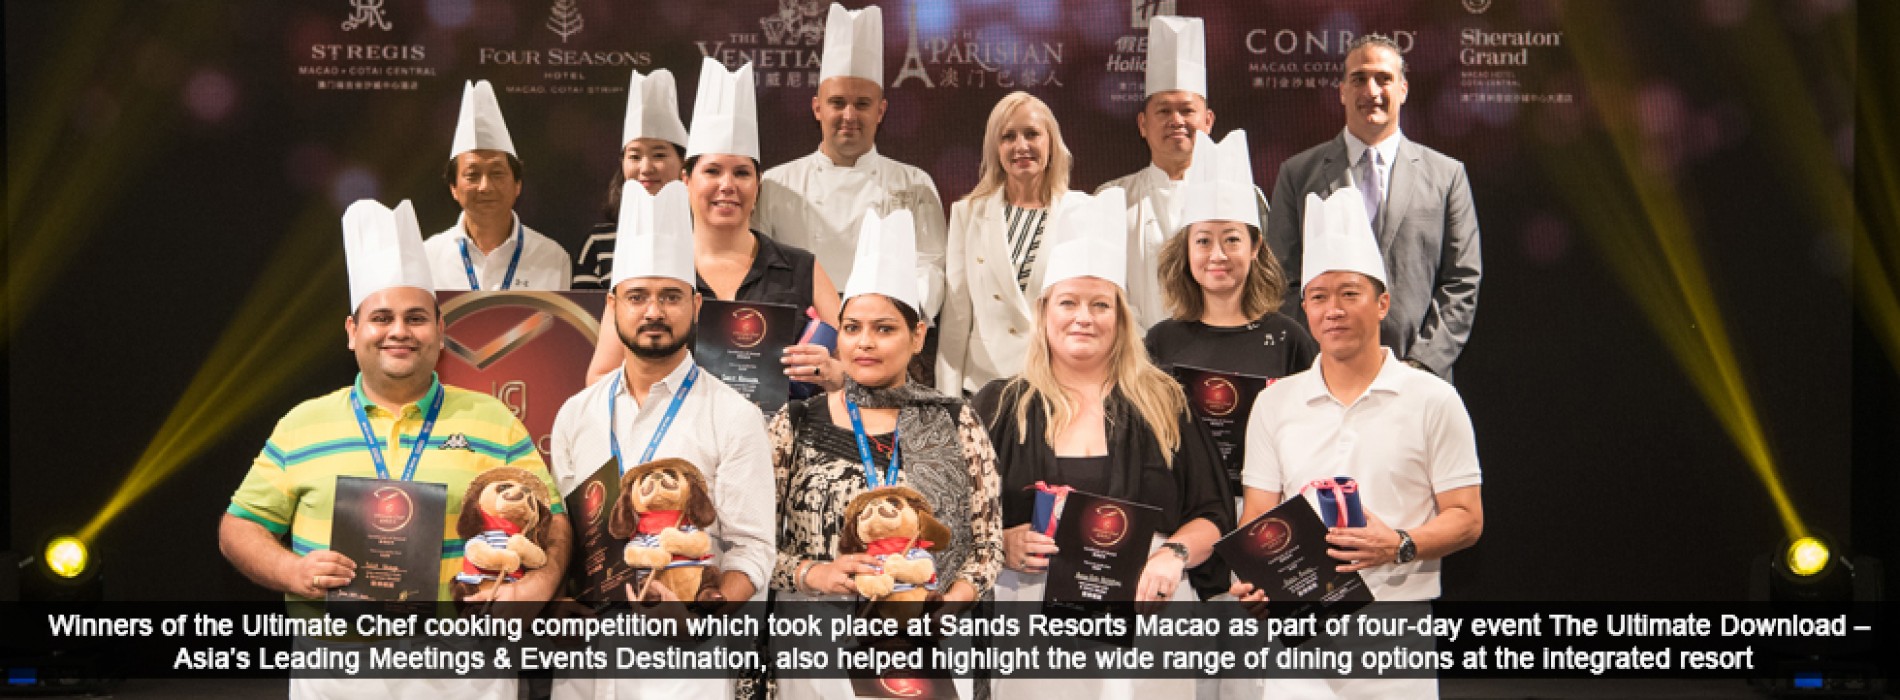 Sands Resorts Macao hosts its First ‘The Ultimate Download – Asia’s Leading Meetings & Events Destination’ Tour for International Meeting Convention & Exhibition Professionals